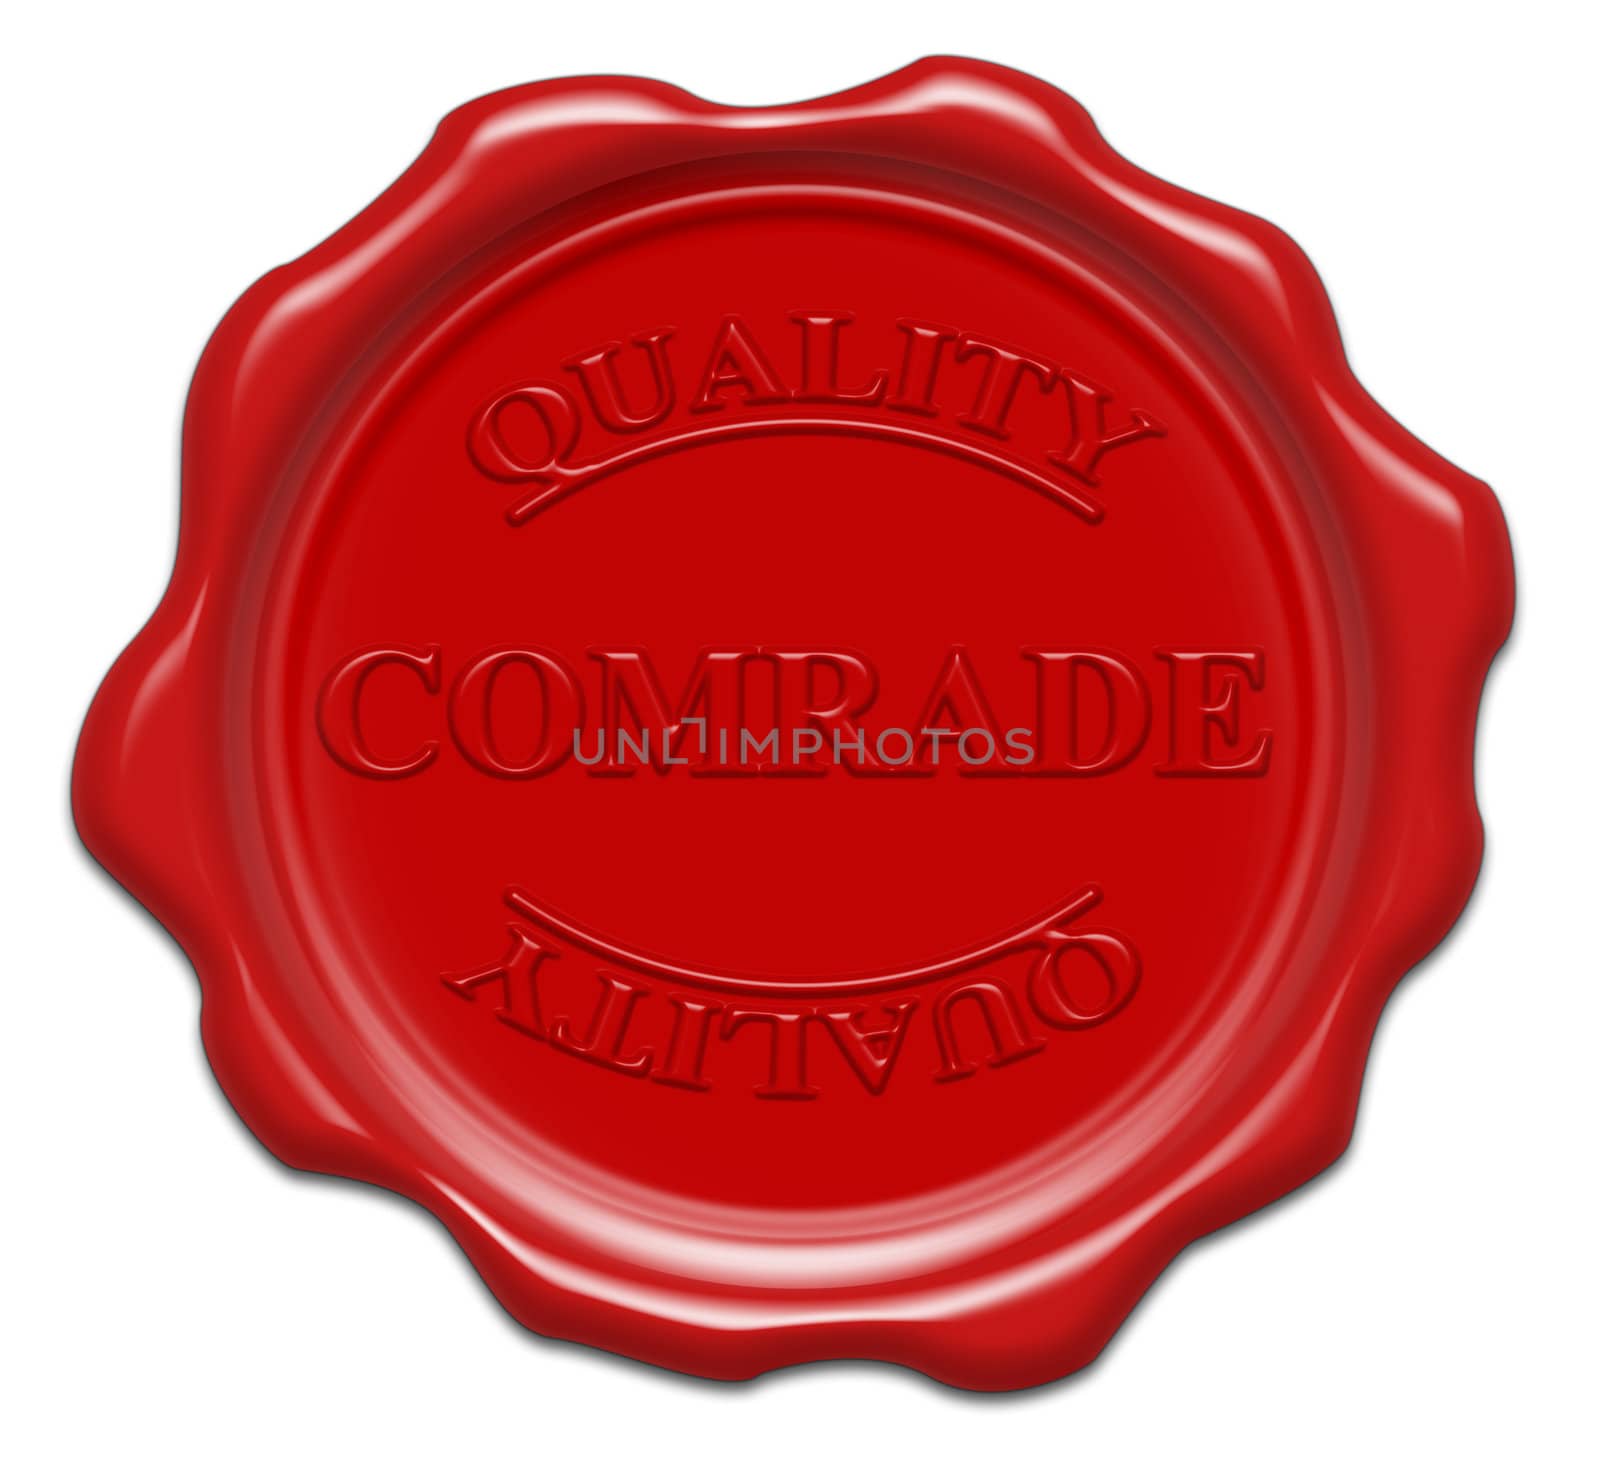 quality comrade - illustration red wax seal isolated on white background with word : comrade